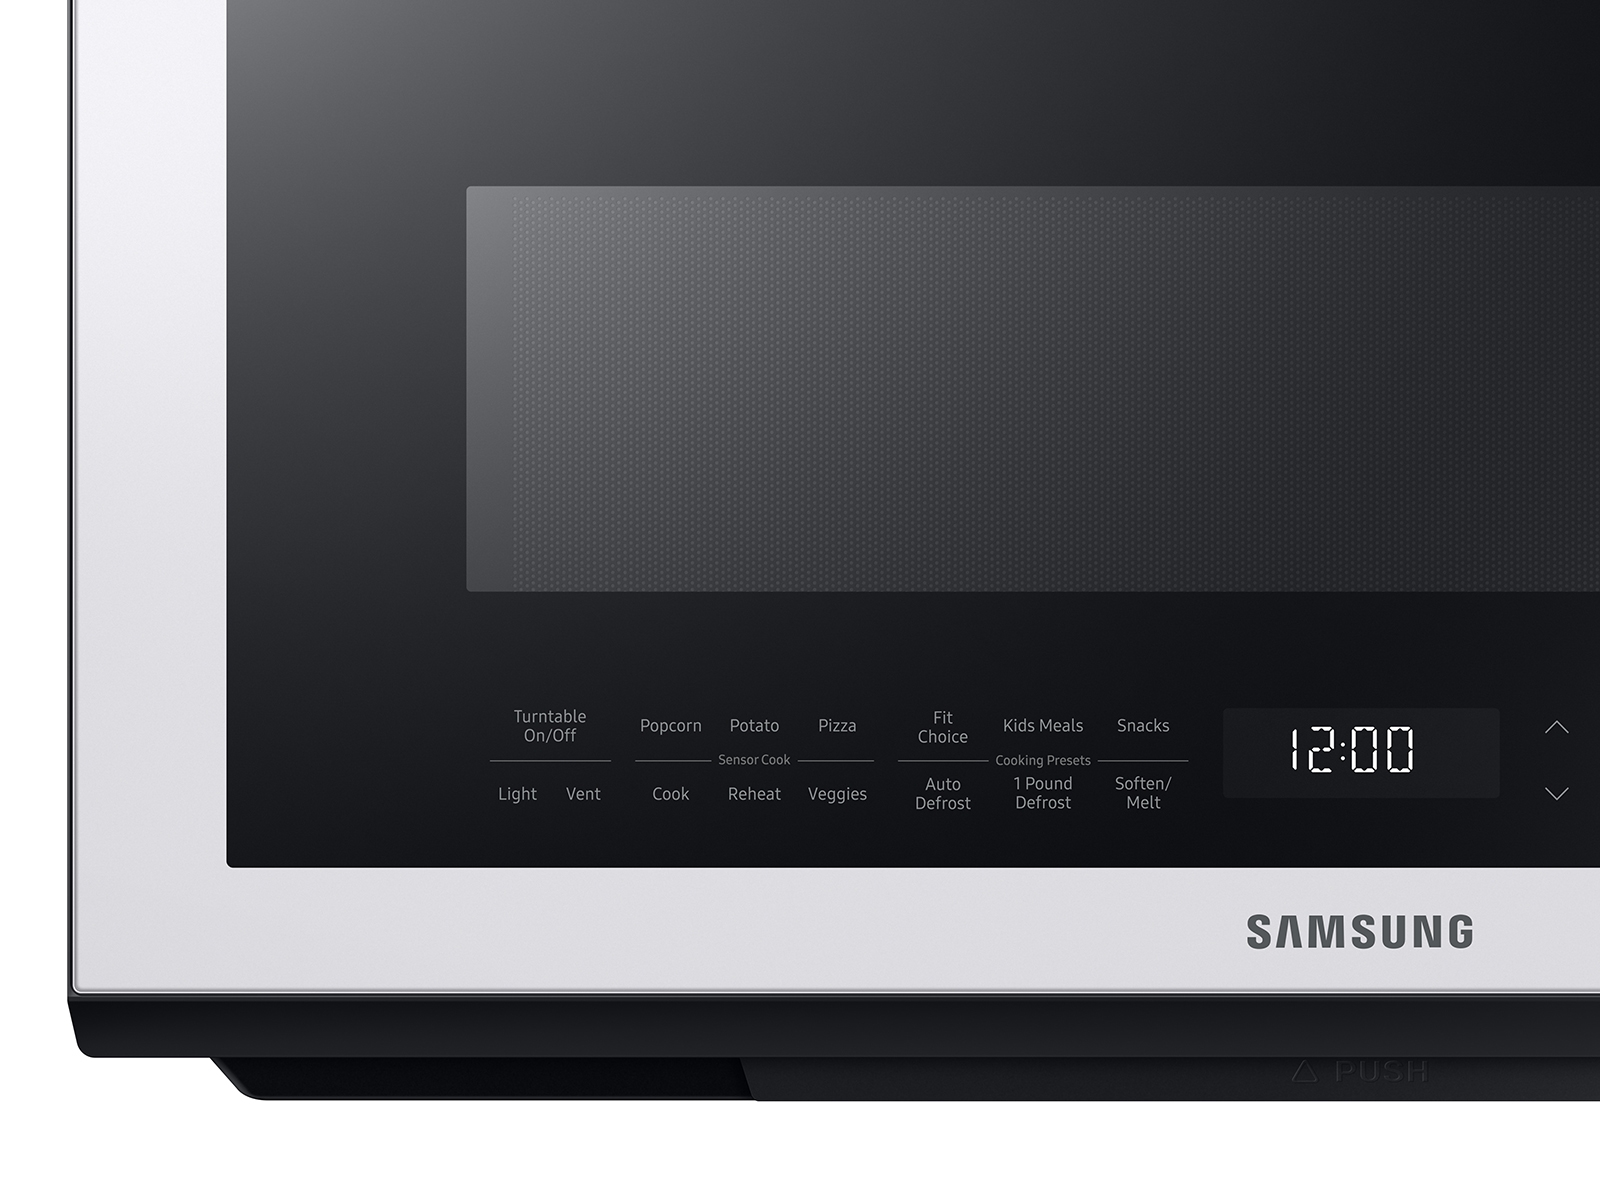 Thumbnail image of Bespoke Over-the-Range Microwave 2.1 cu. ft. with Sensor Cooking in White Glass